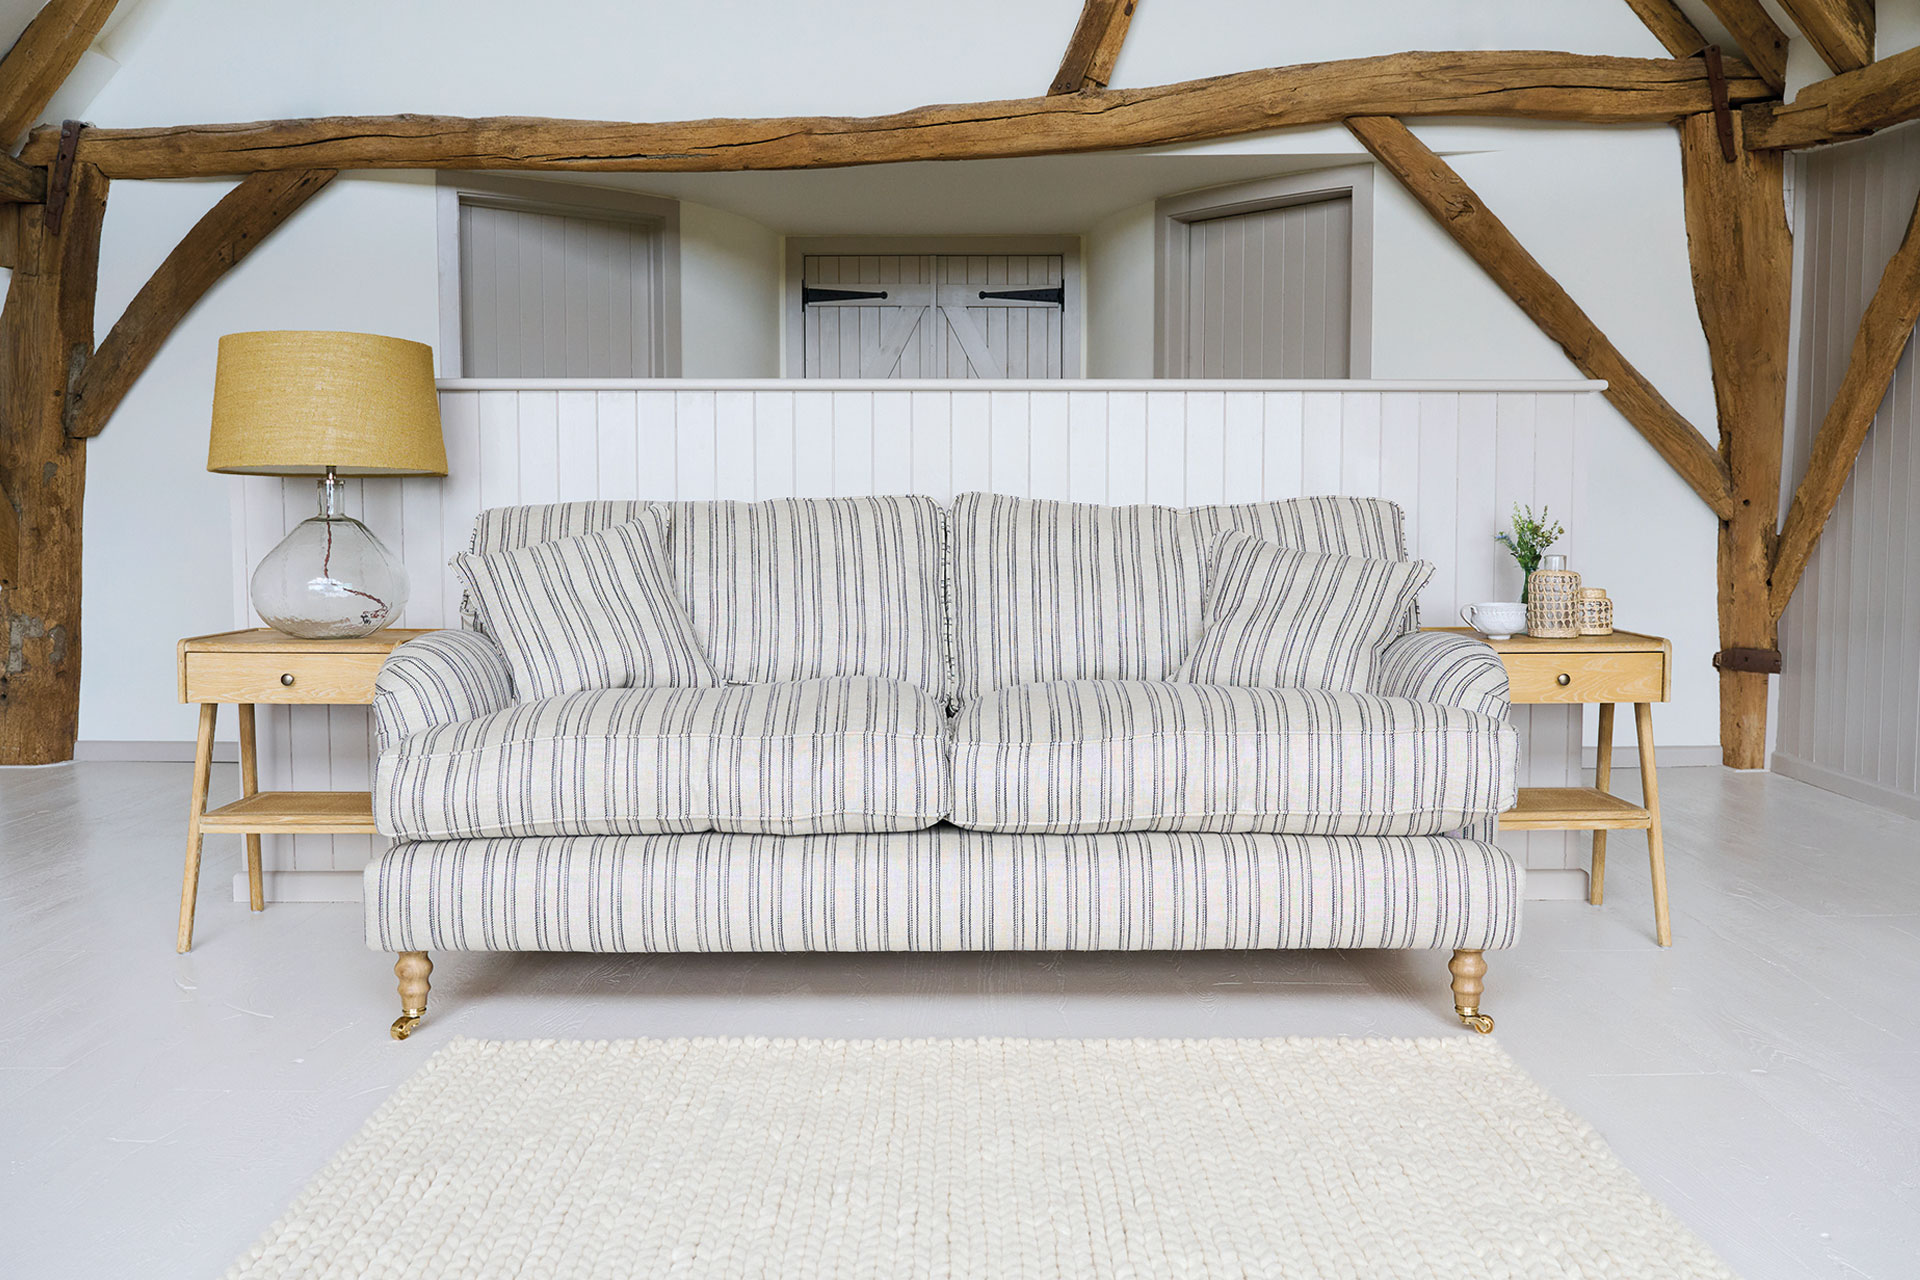 Sofas & Stuff Is The British Sofa Company To Know, Creating Tailored, One-Of-A-Kind Sofas